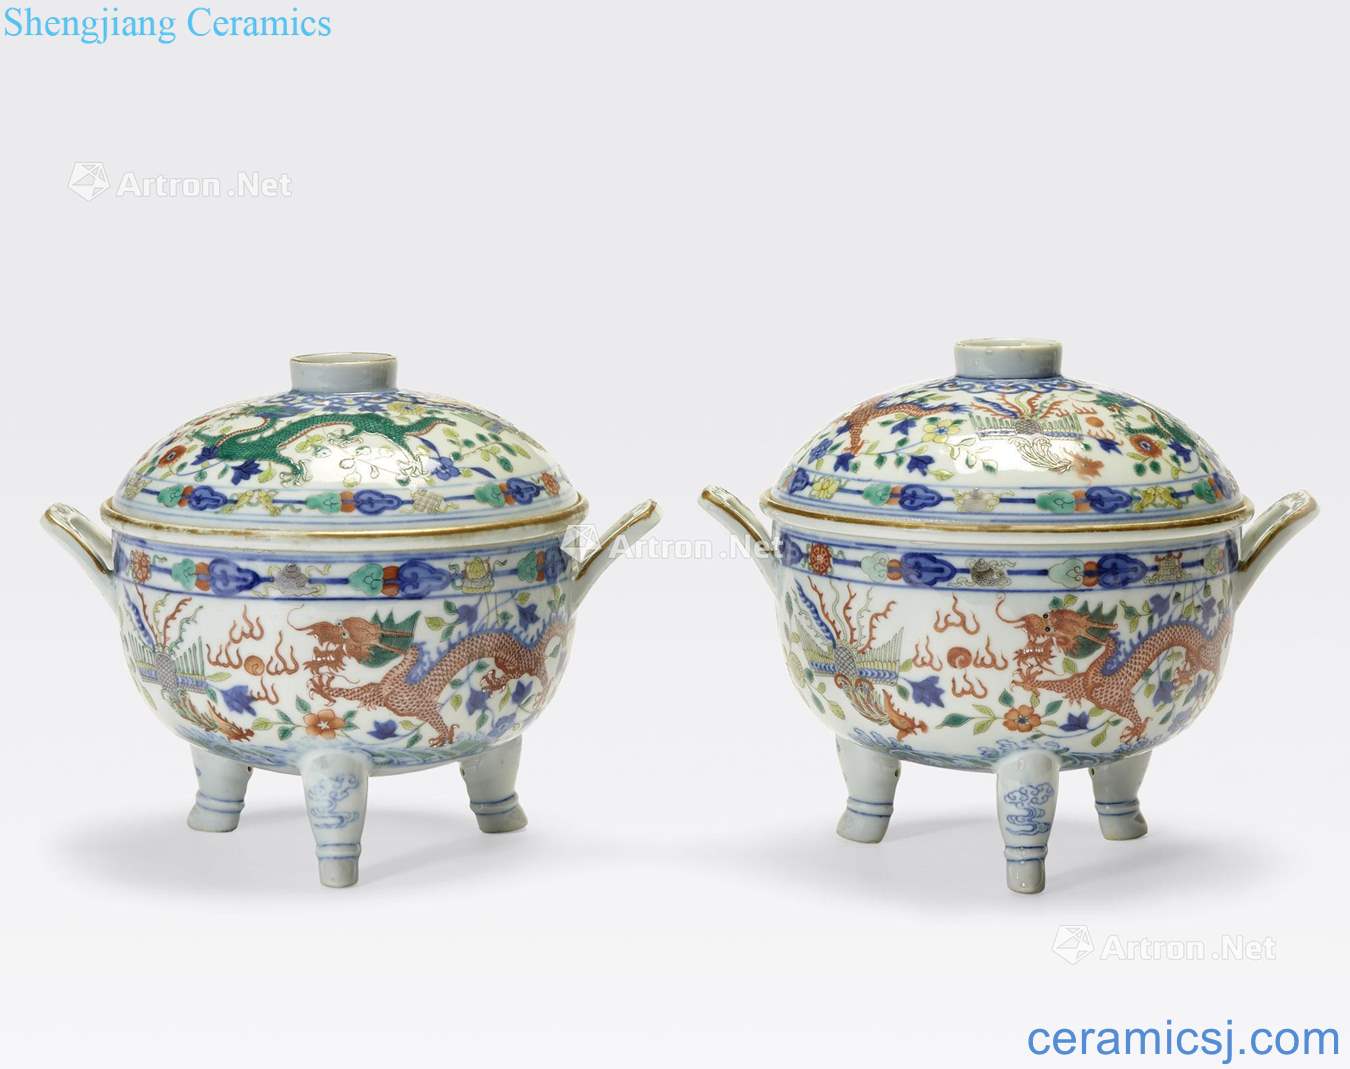 Guangxu six - character marks and of the period of A PAIR of WUCAI ENAMELED COVERED FOOD WARMERS WITH LINERS